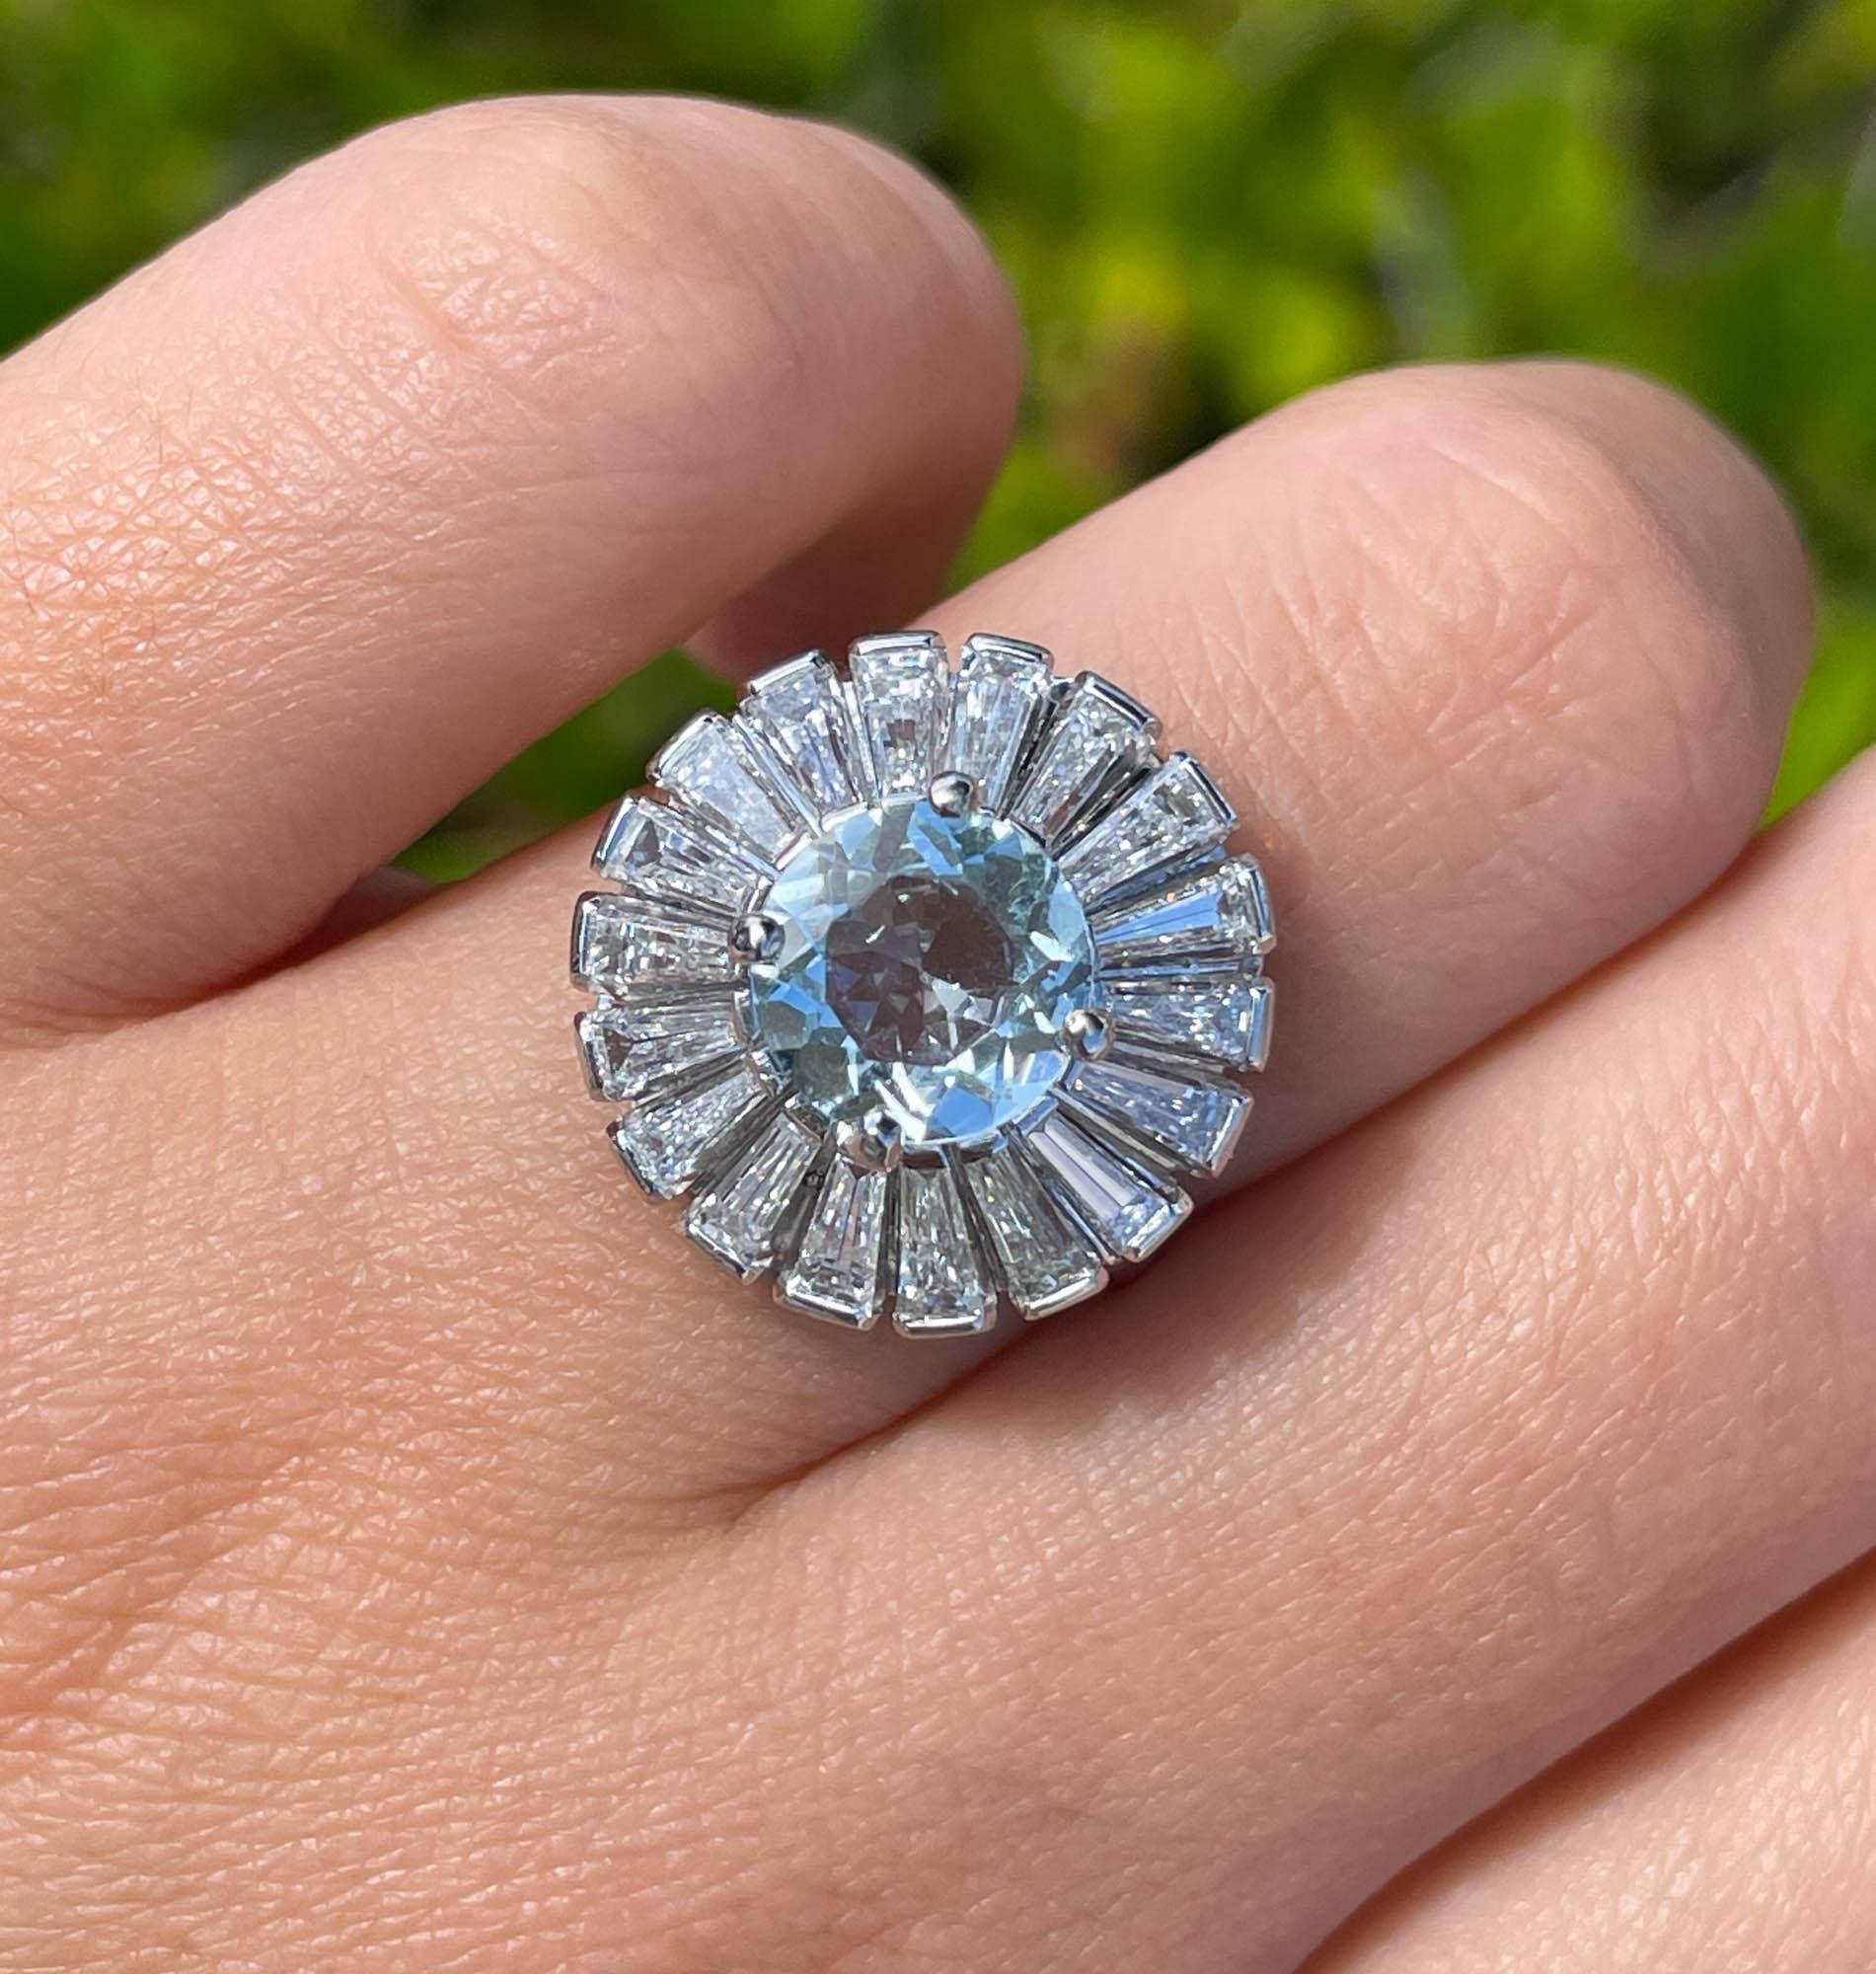 Jay Feder Platinum Aquamarine and Diamond Ballerina Cluster Ring
The center stone is natural round shaped aquamarine; measures to 8mm in diameter; estimated weight is 1.45 carats.
Set with 18 tapered baguette diamonds; estimated total is approx. 3